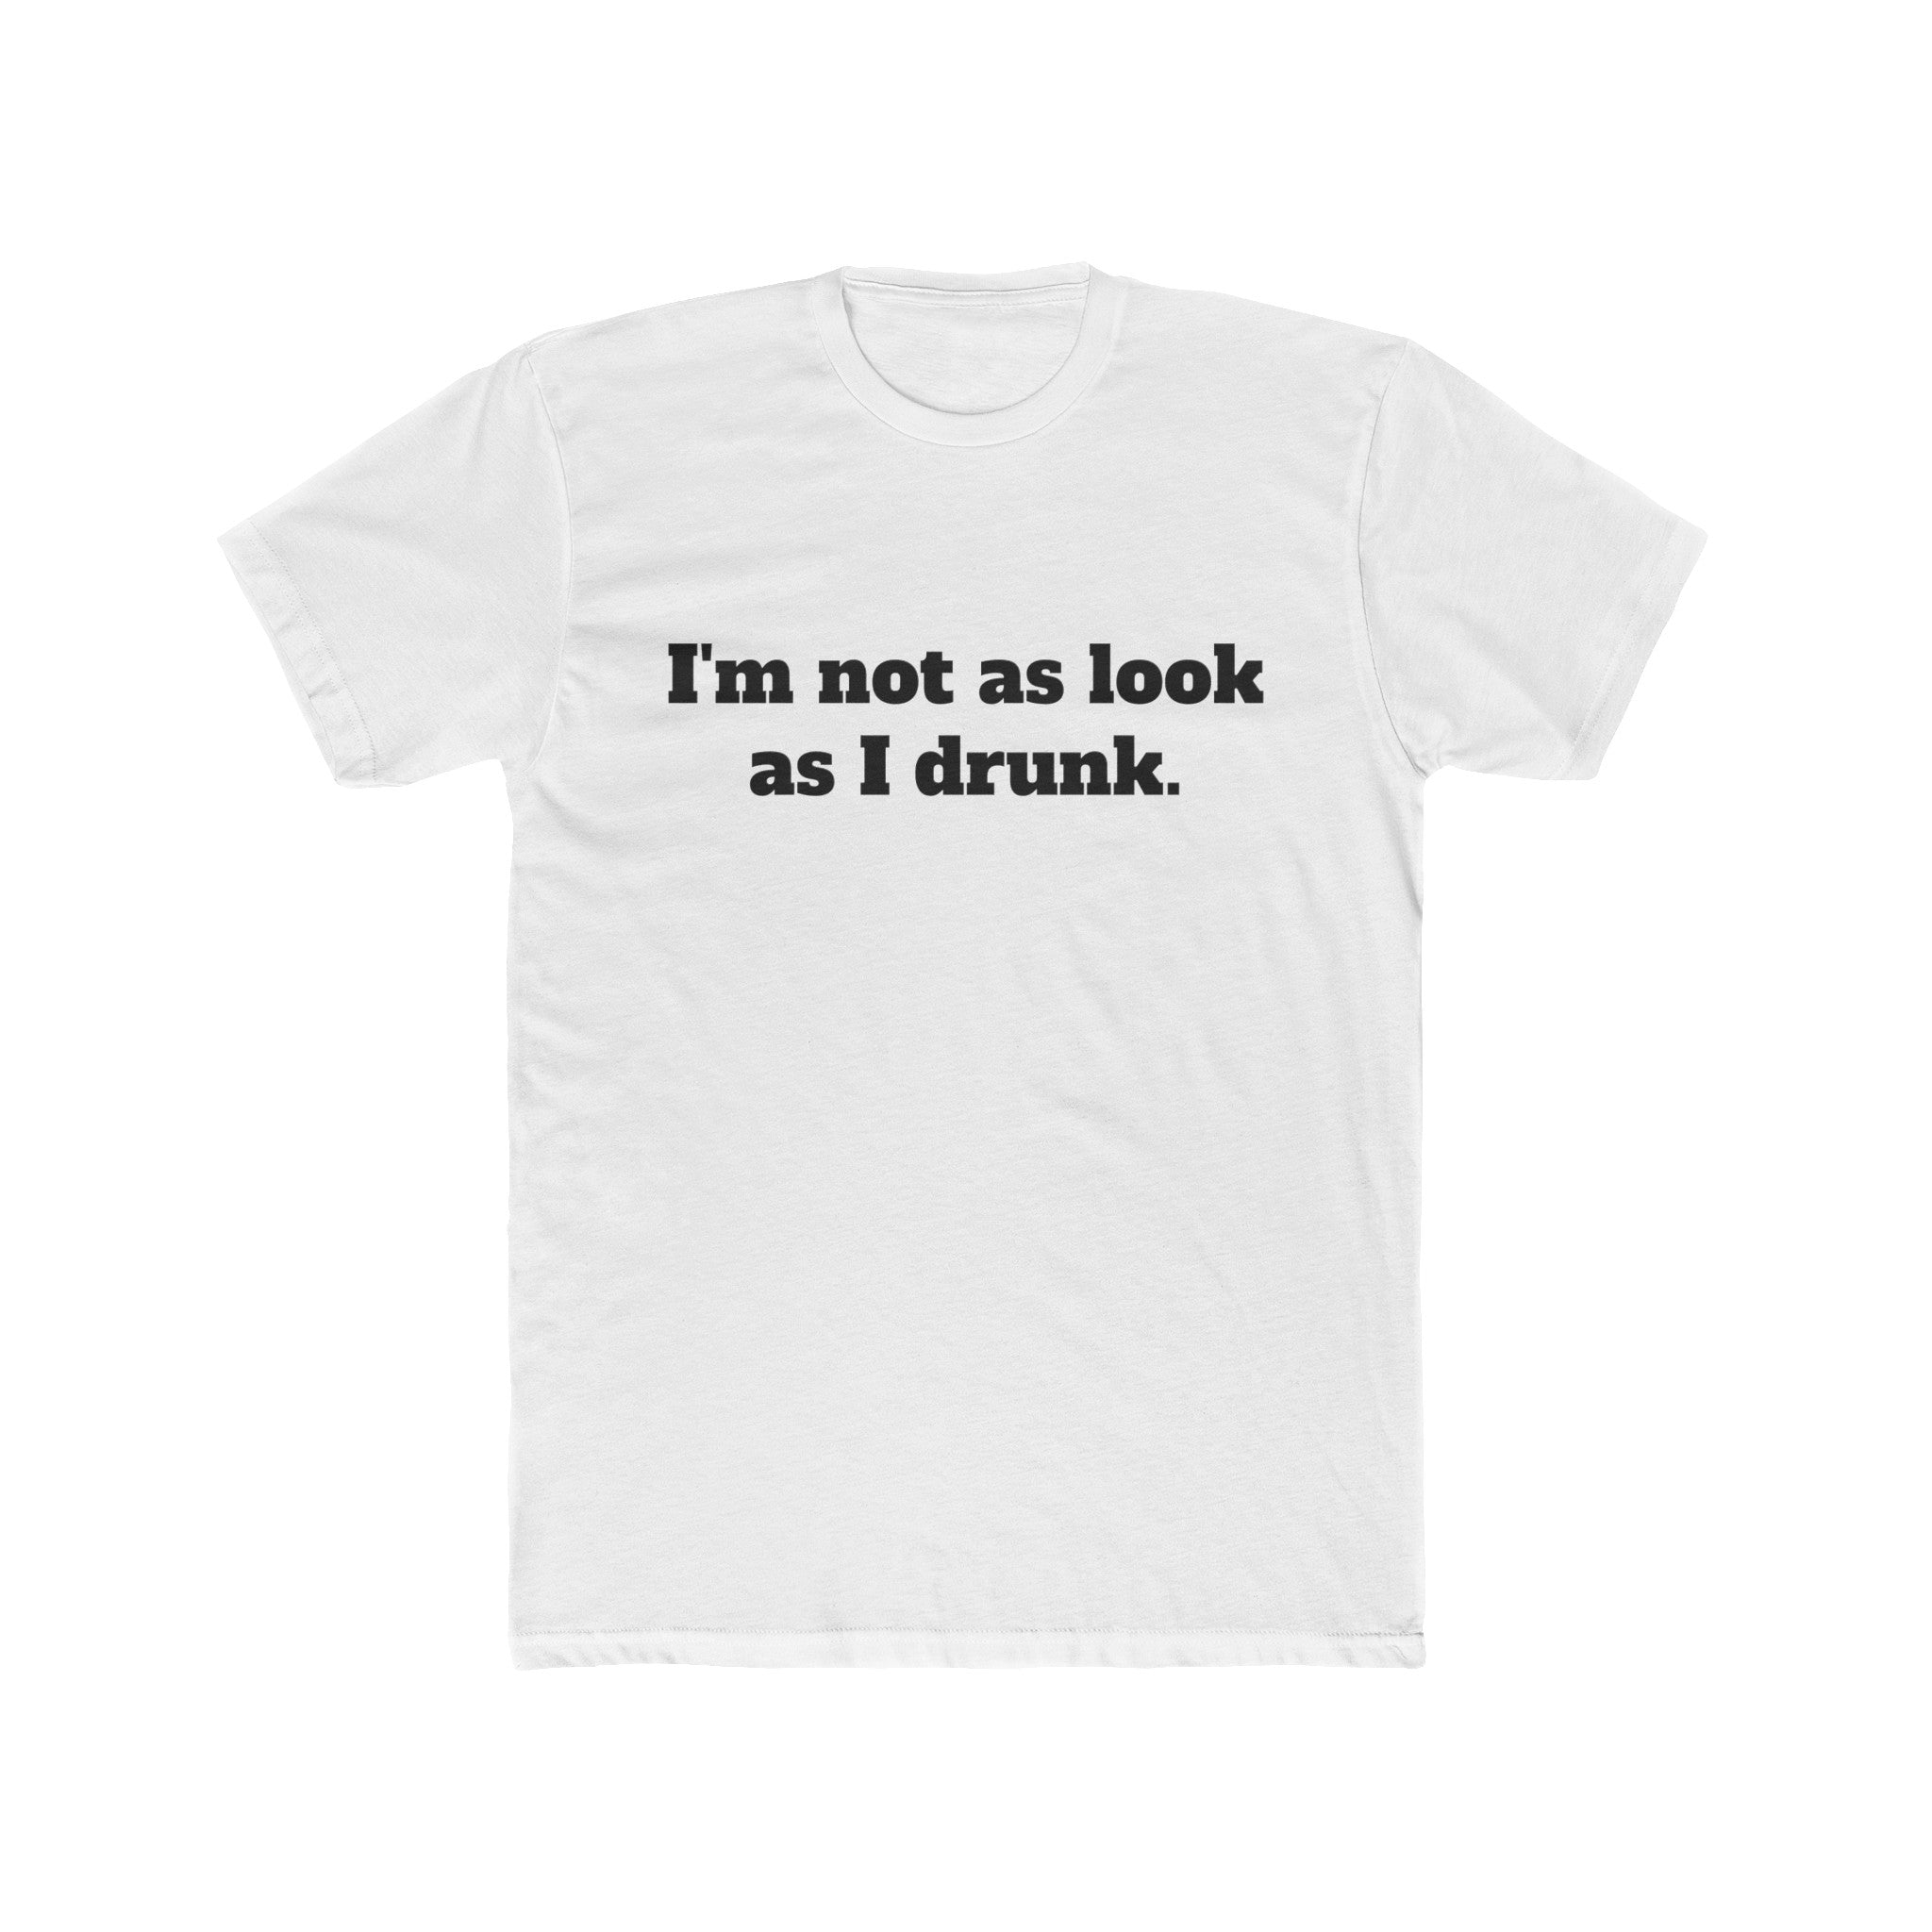 The image displays a stylish men's cotton crew tee, featuring the phrase "I'm Not as Look as I Drunk" in bold, eye-catching lettering across the chest. The shirt's relaxed fit and classic design are visible, emphasizing comfort and style, while the humorous message is sure to be a focal point.